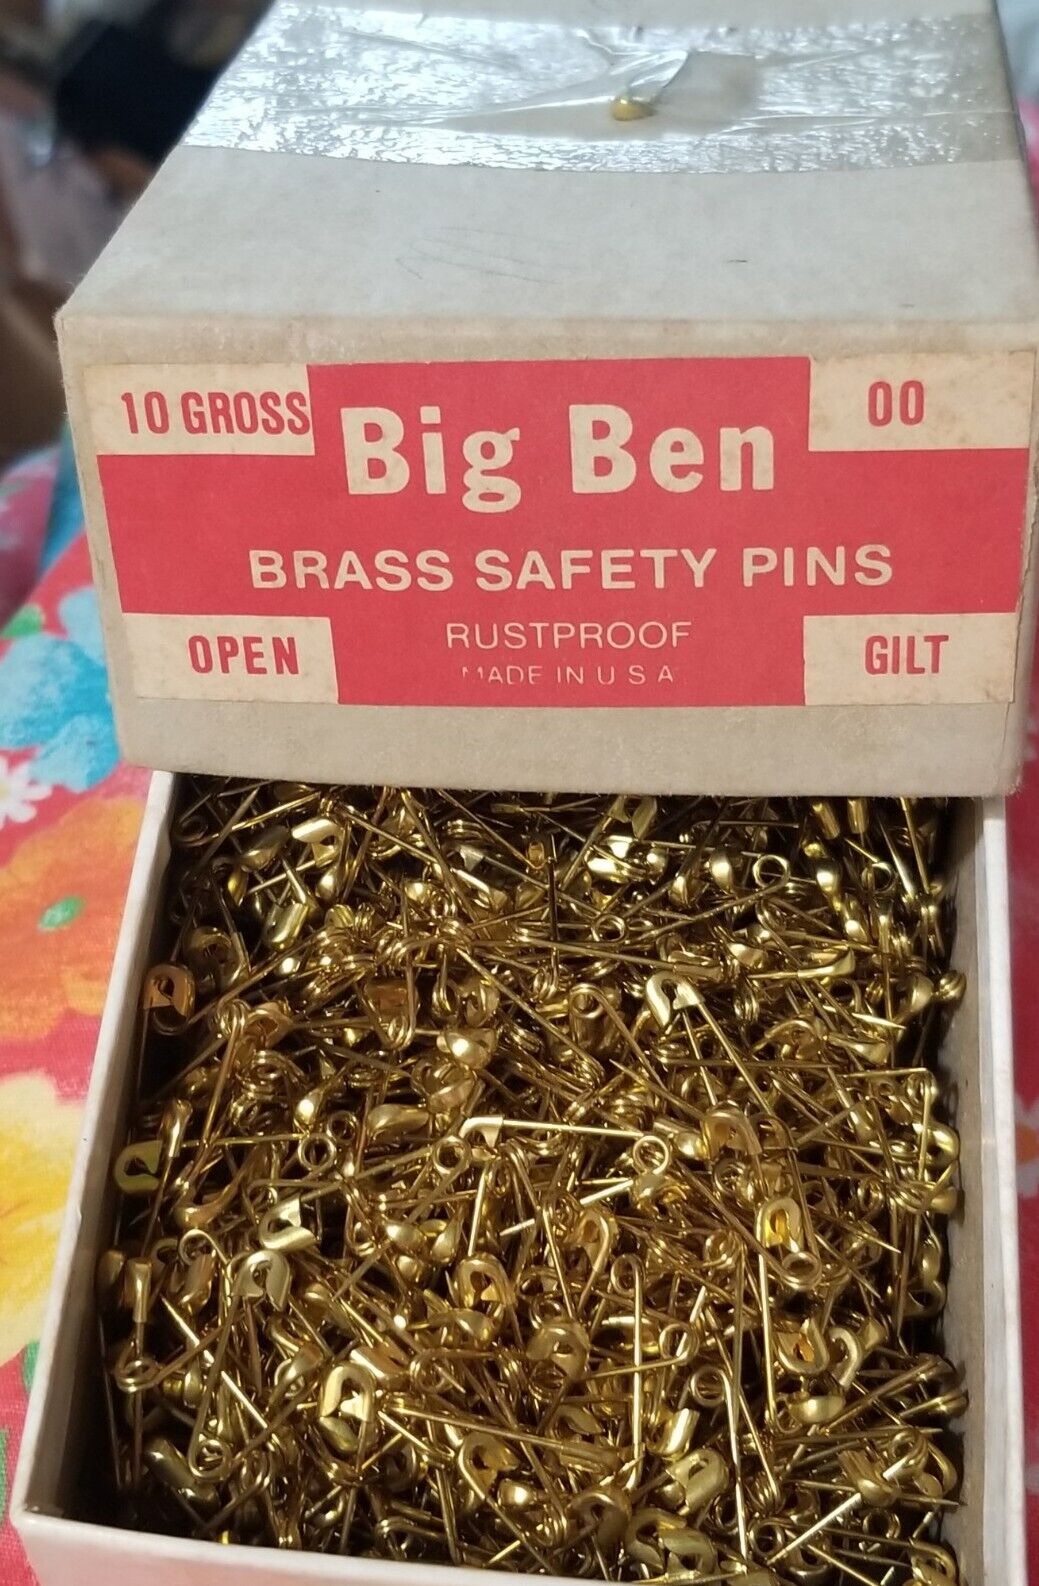 Vintage Brass Safety Pins 00 Rust Proof Made in USA Open Box Gilt